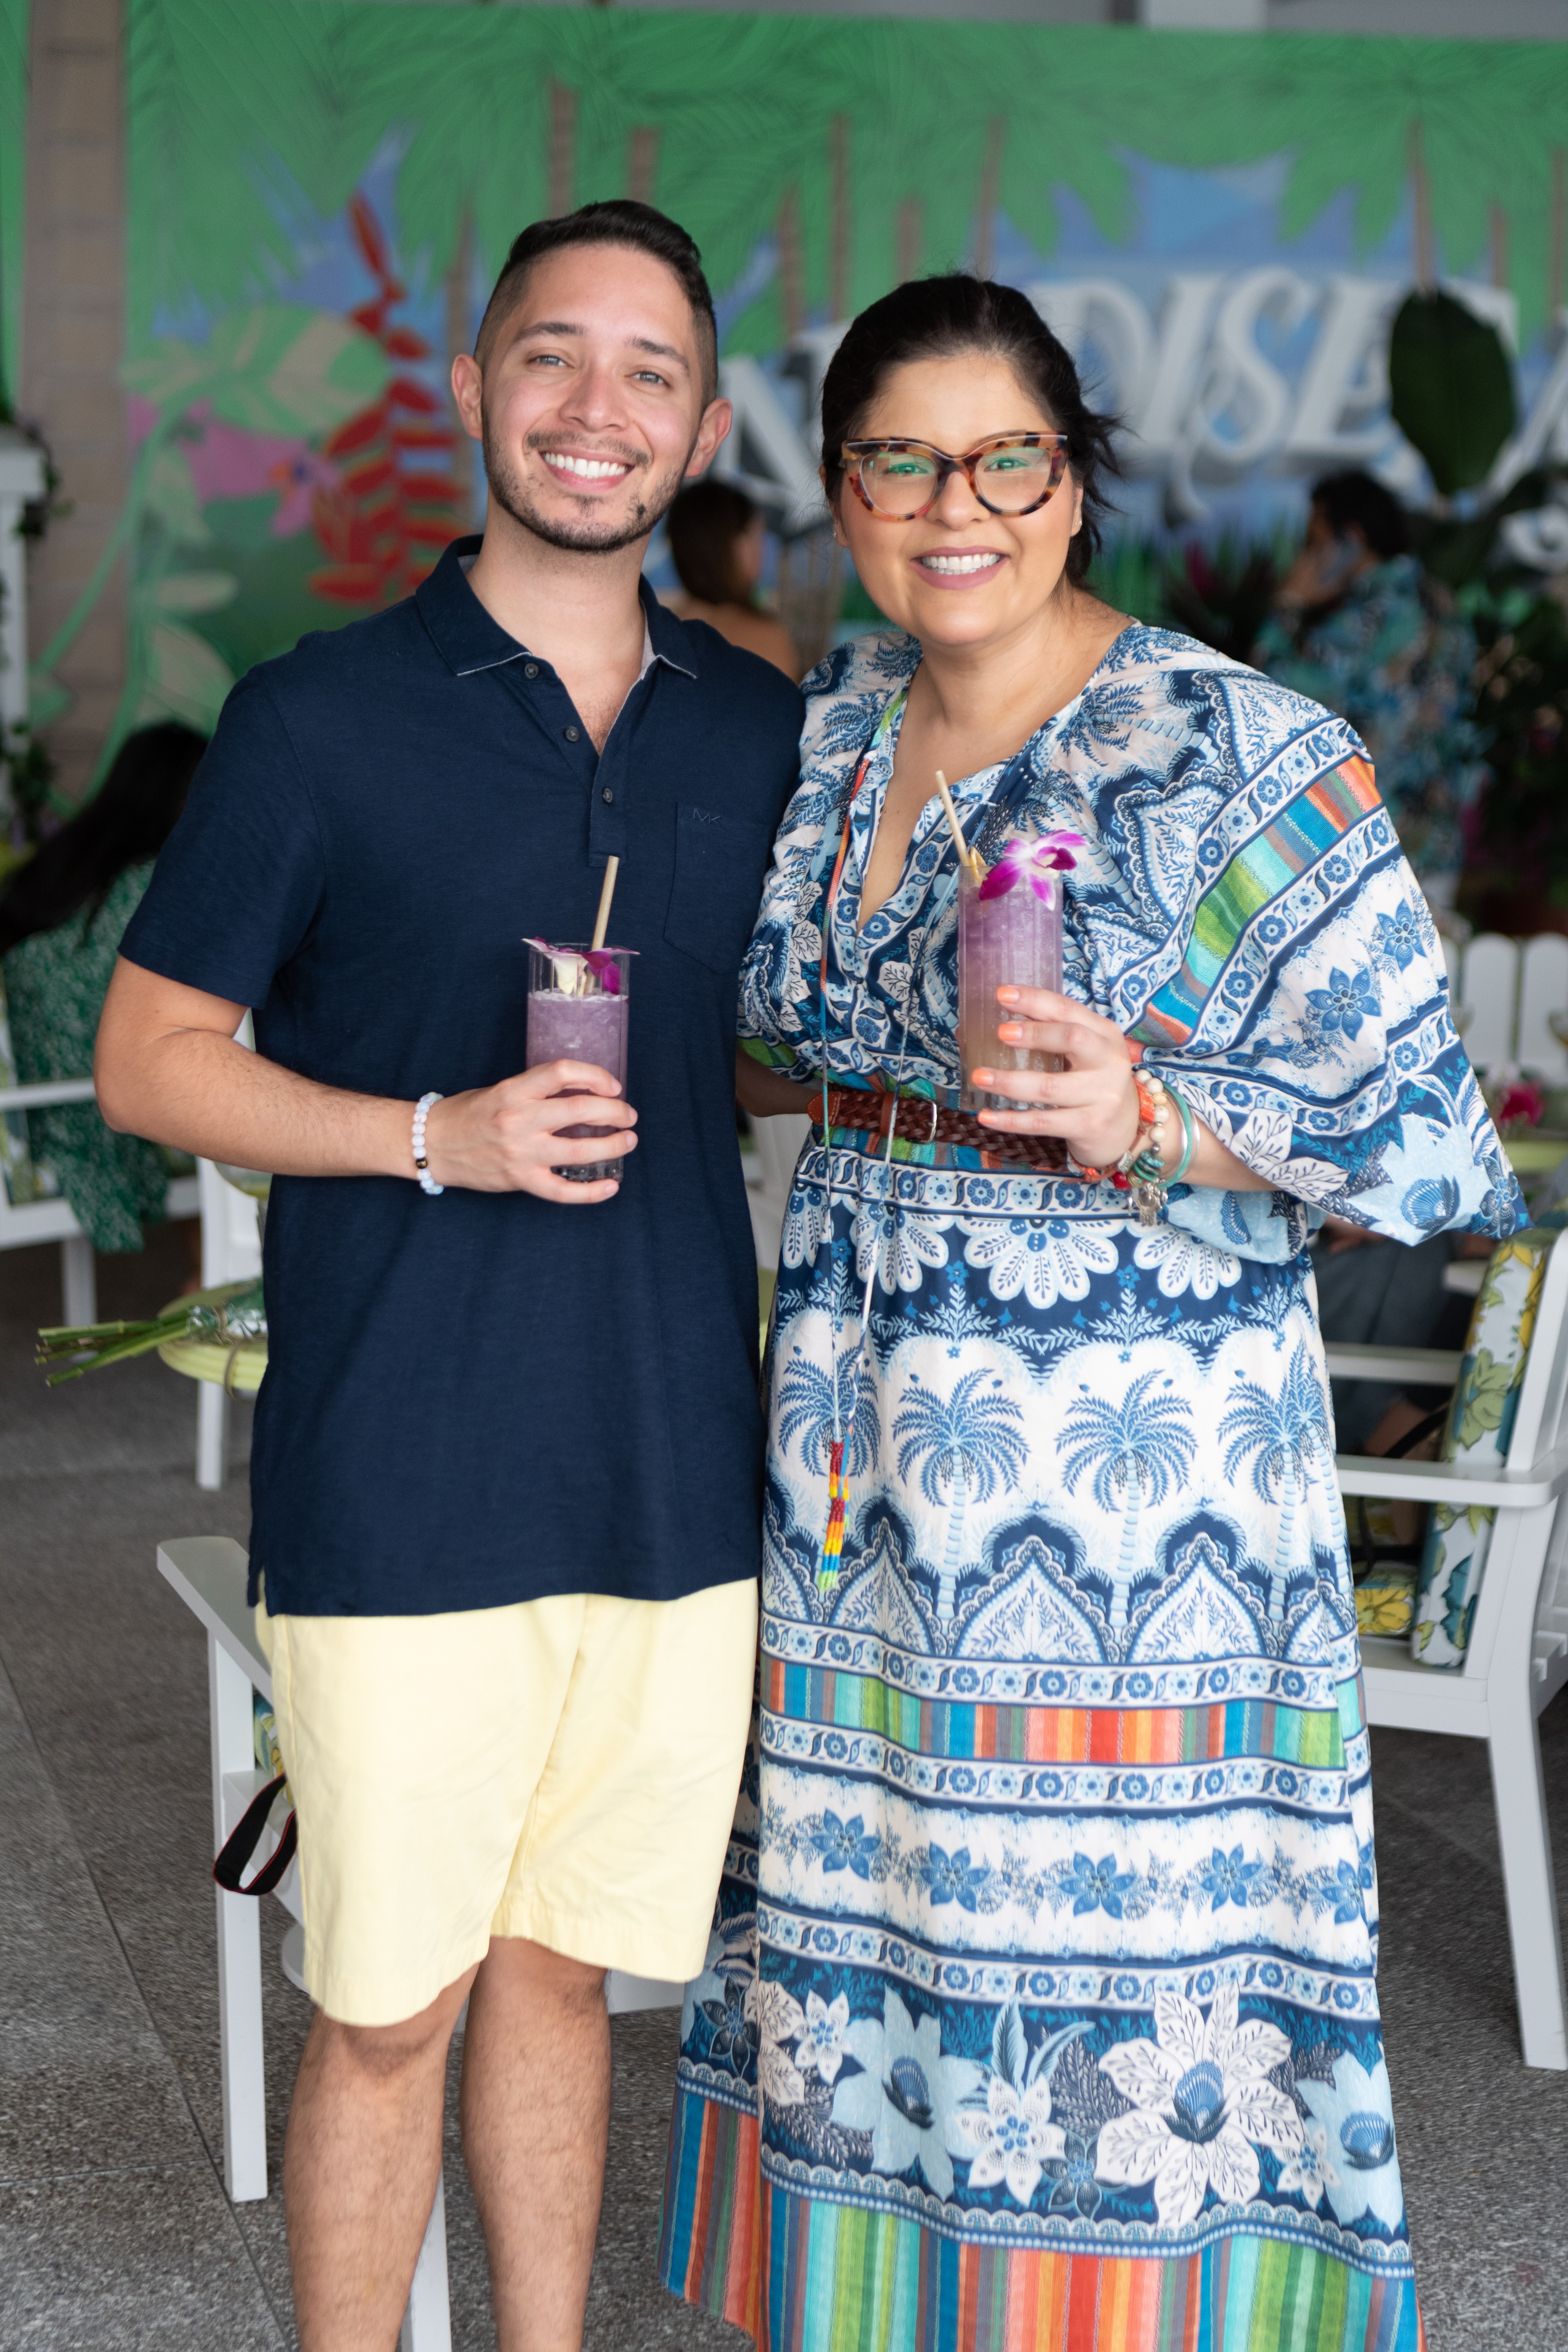 Man and woman smile for a photo together holding cocktails